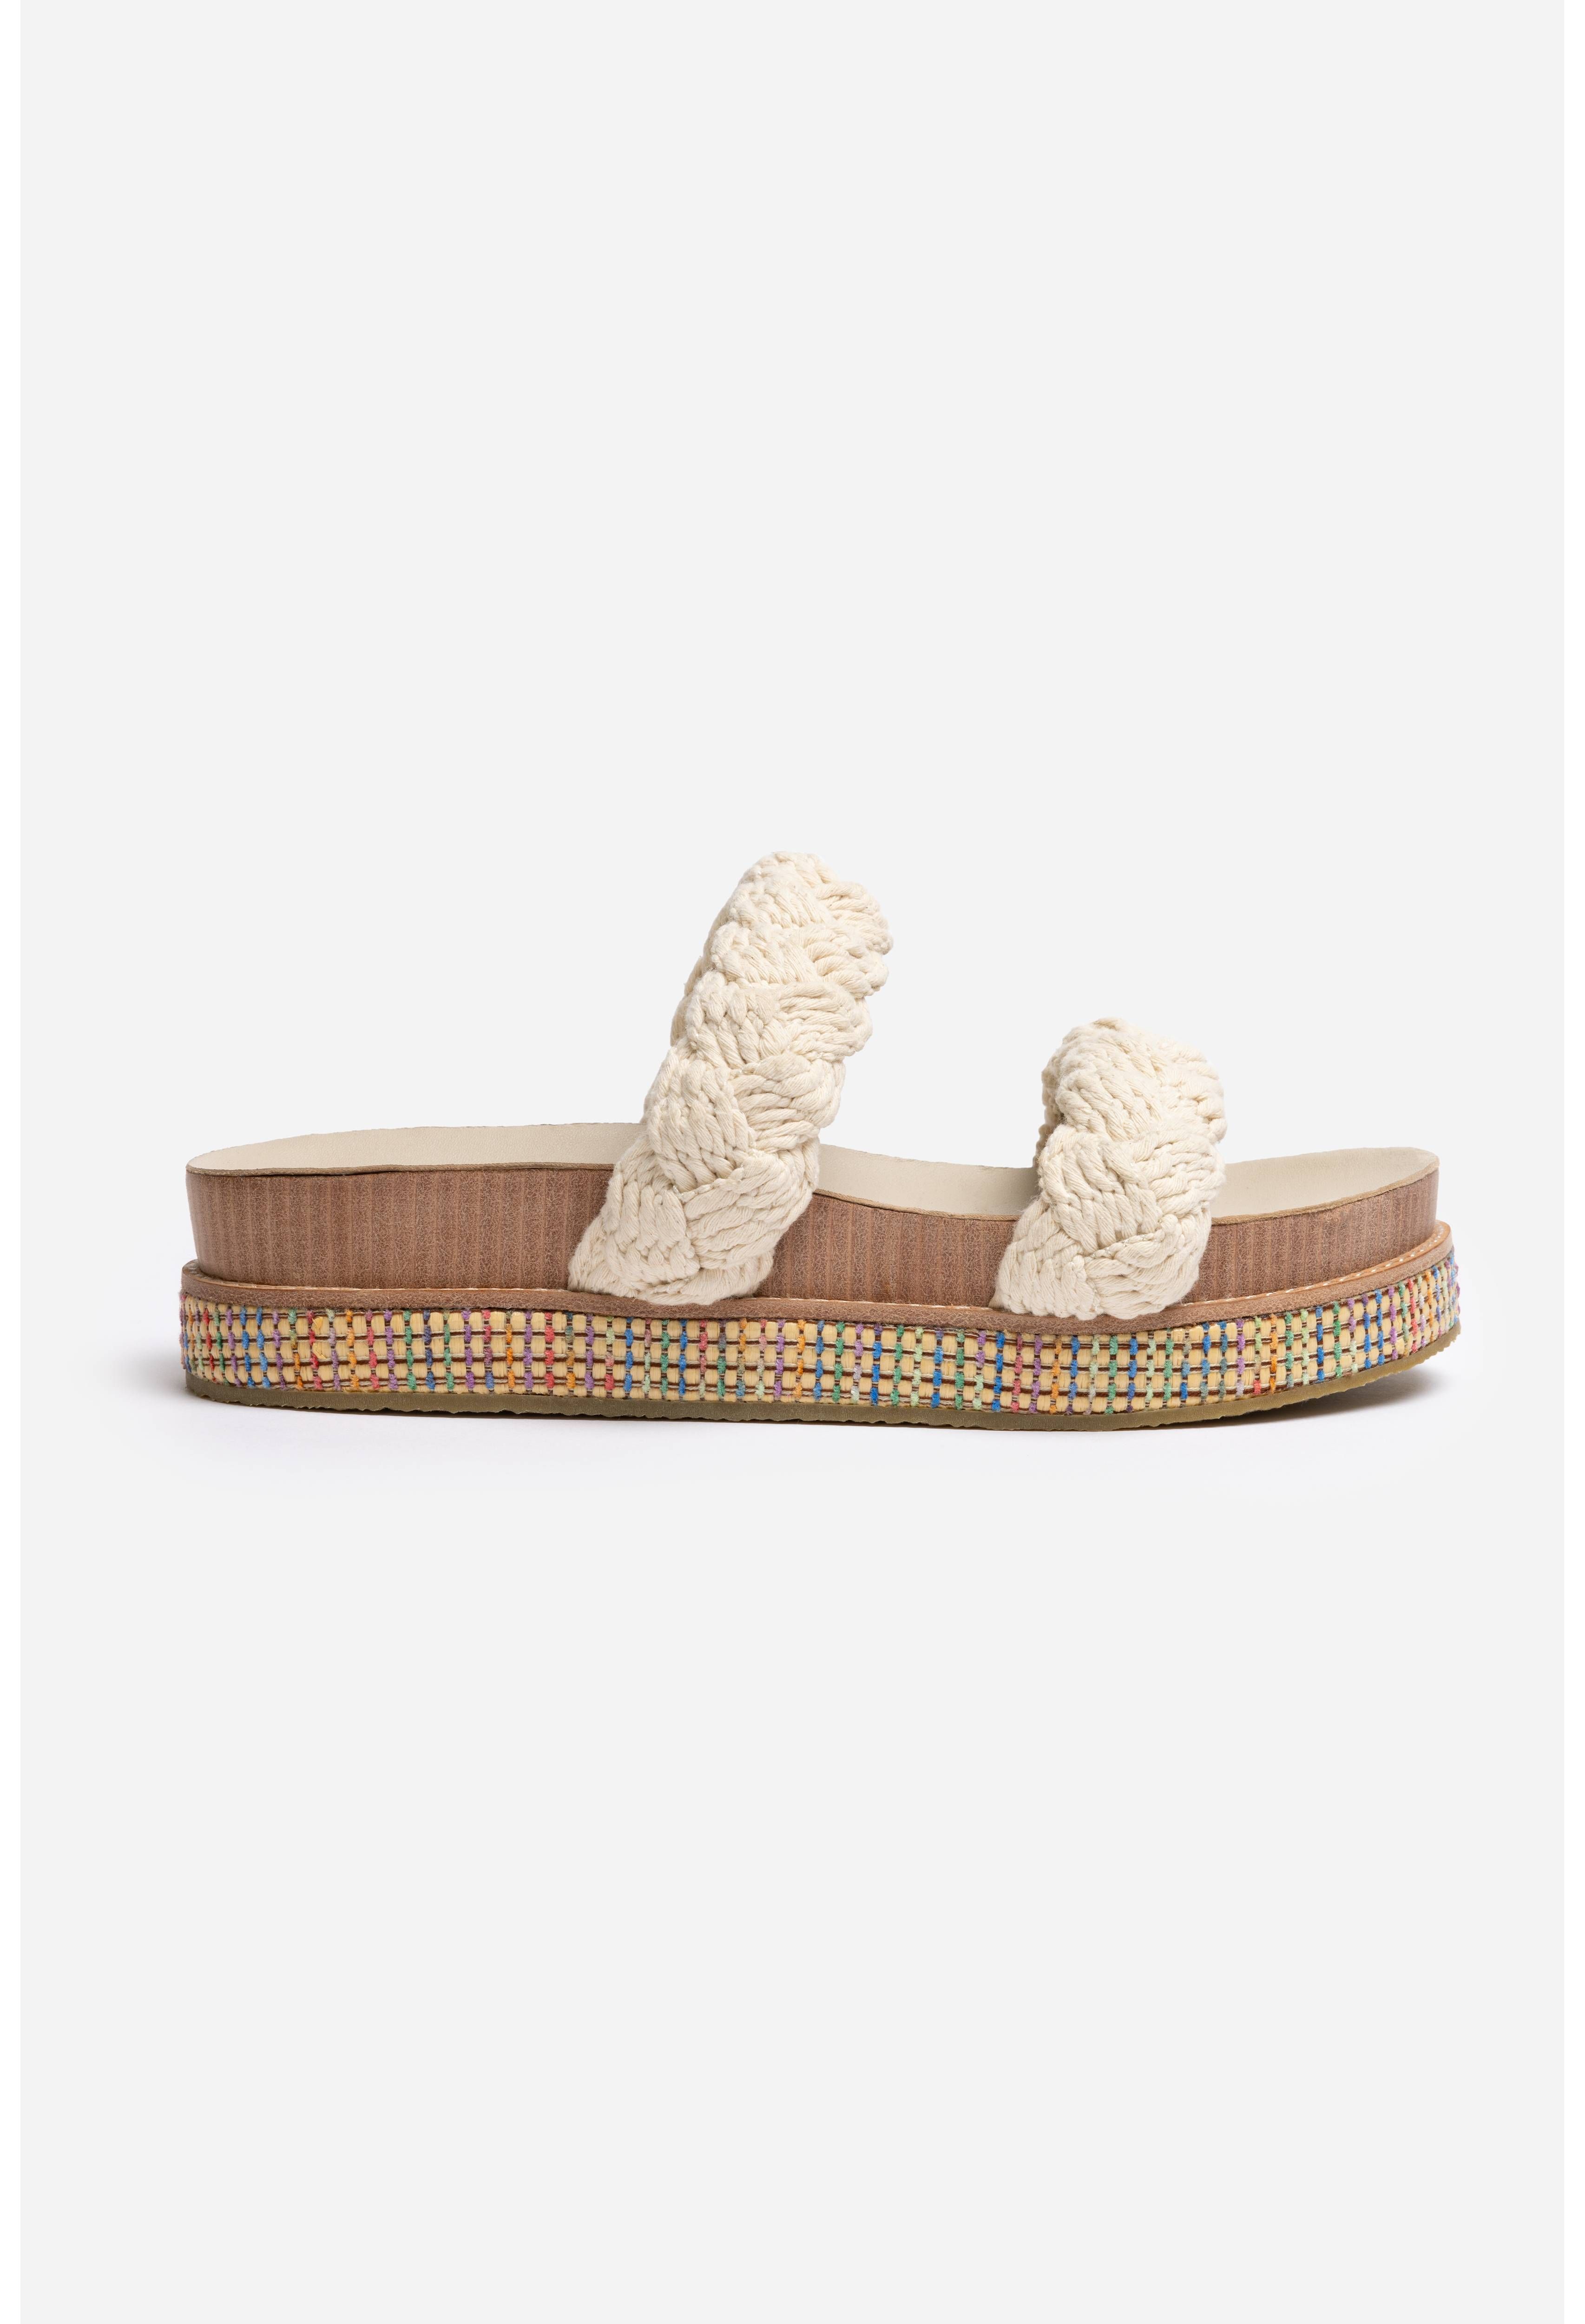 Braided Rope Sandal - Cream | Johnny Was | Johnny Was